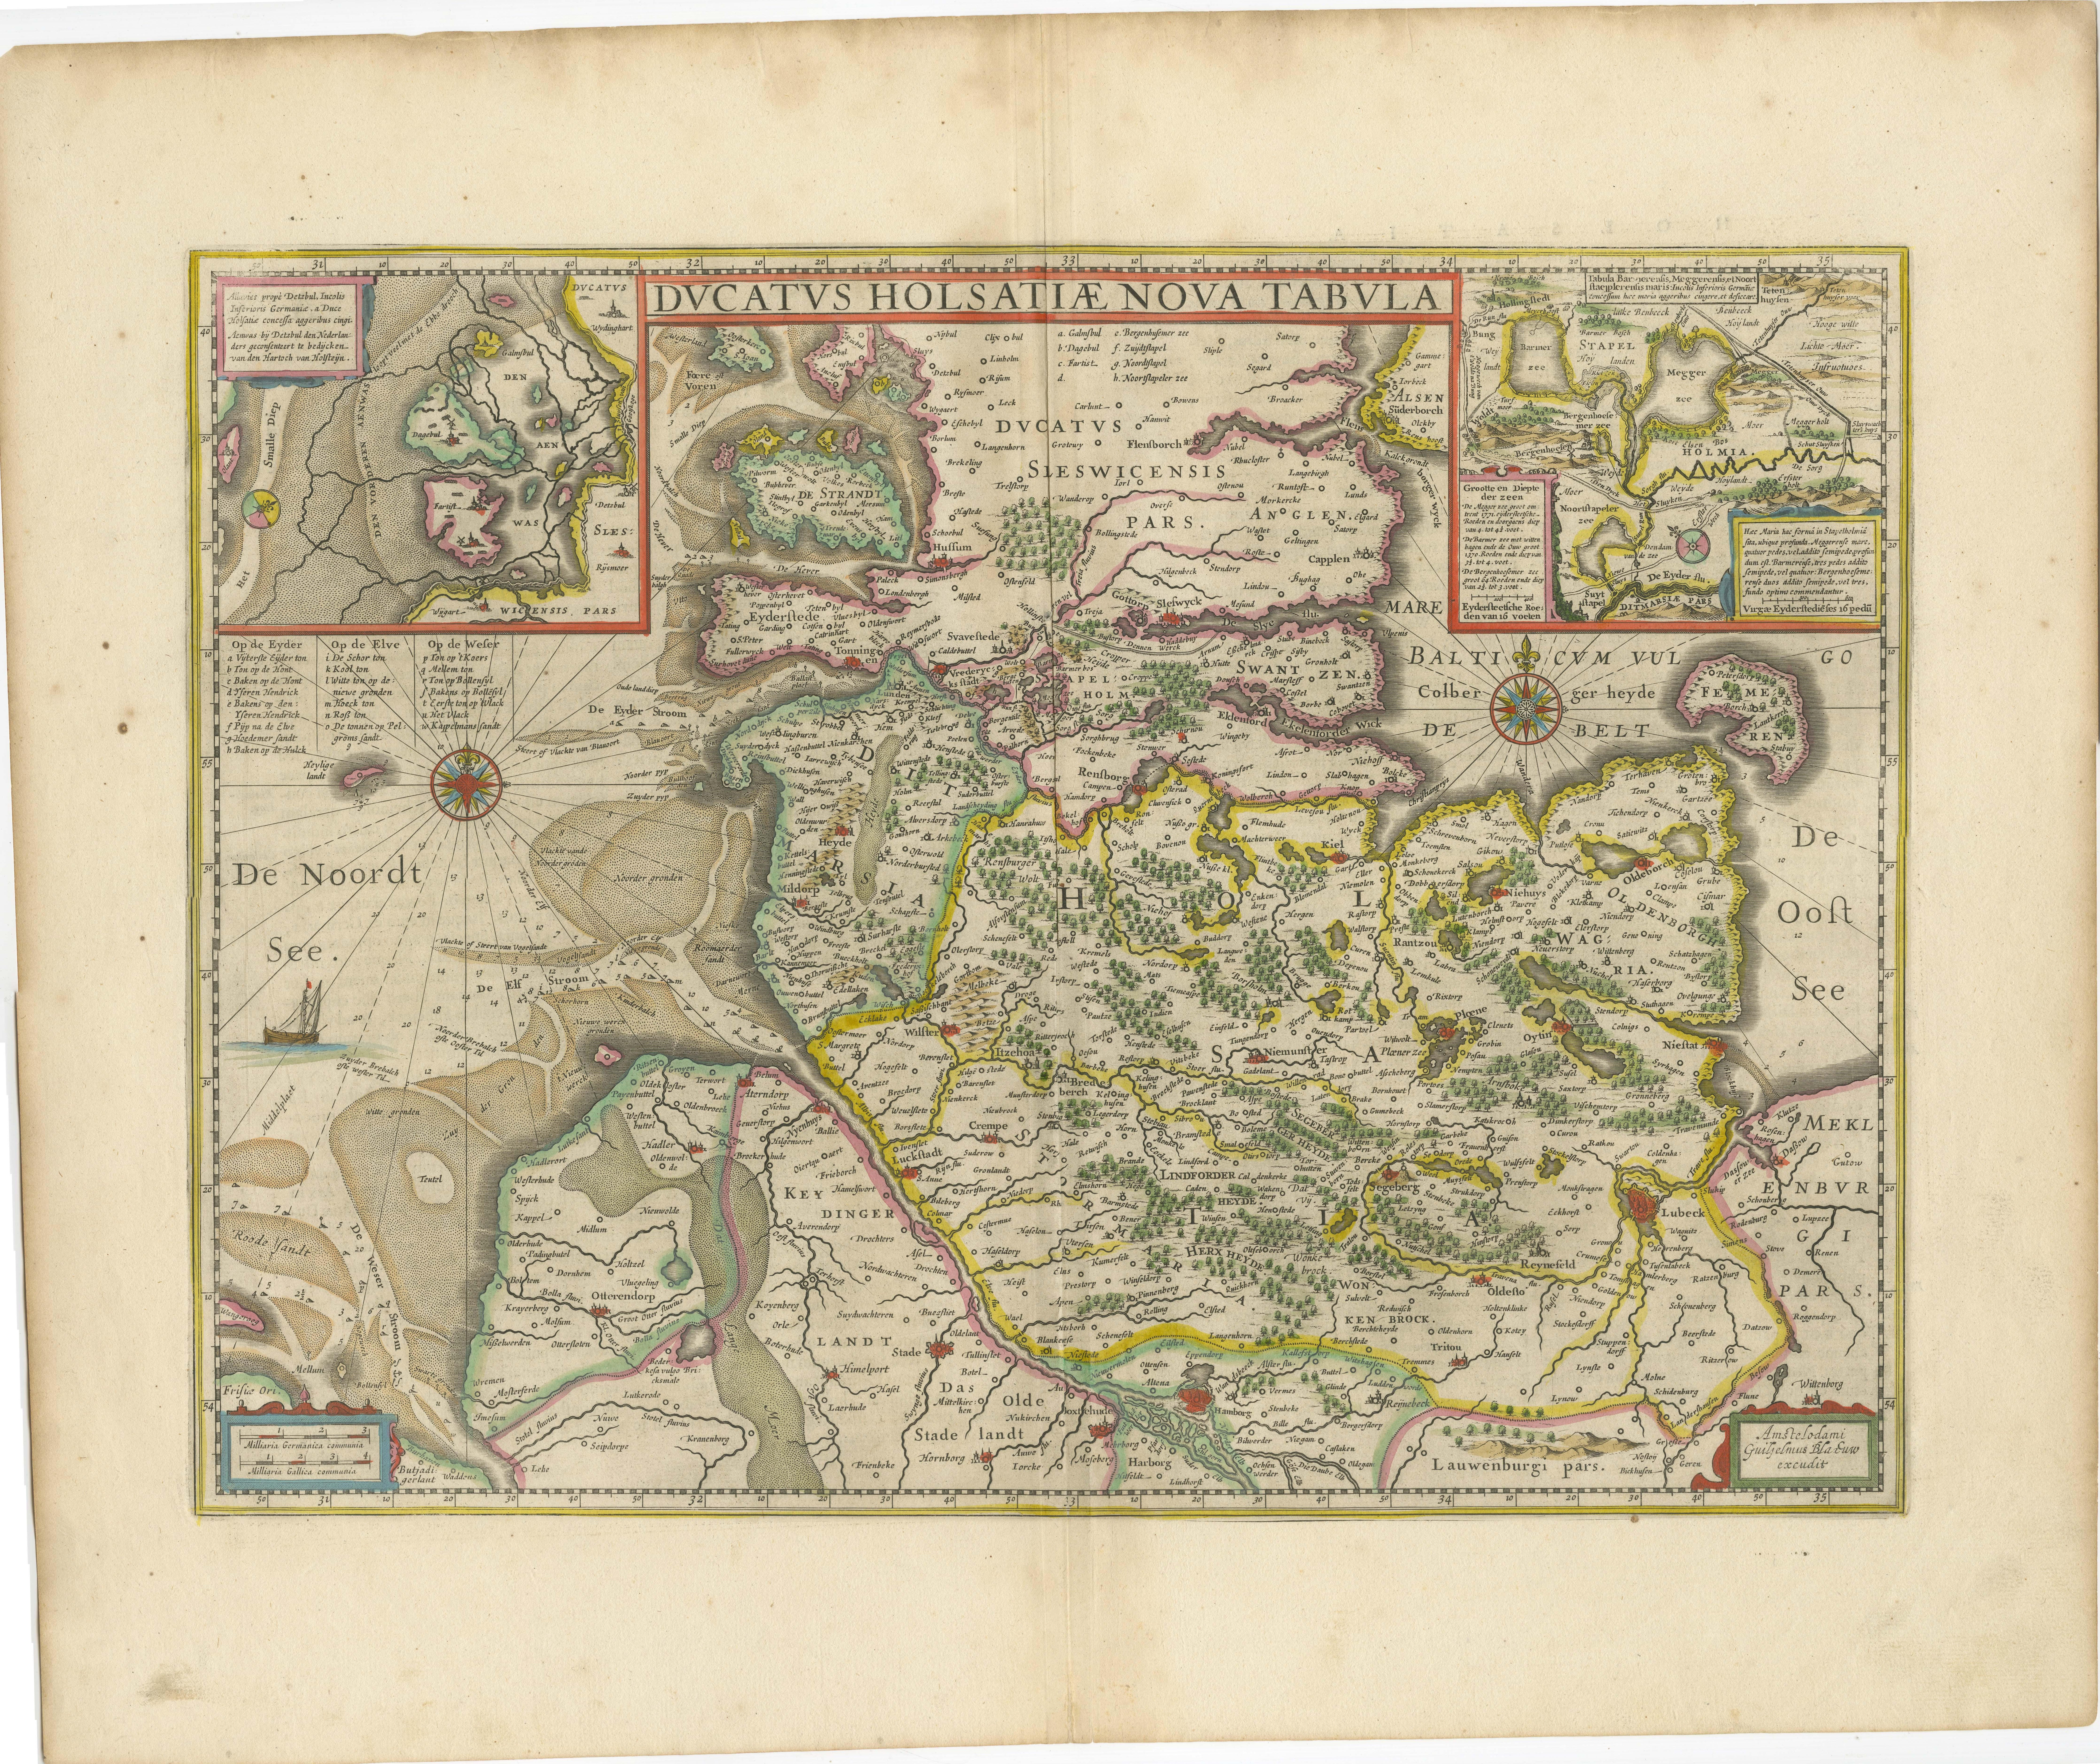 Antique map titled 'Ducatus Holsatiae Nova Tabula'. Original old map of the Duchy of Holstein, the northernmost territory of the Holy Roman Empire, from the mid-17th Century. To the north lies the Danish Duchy of Schleswig. In the south are